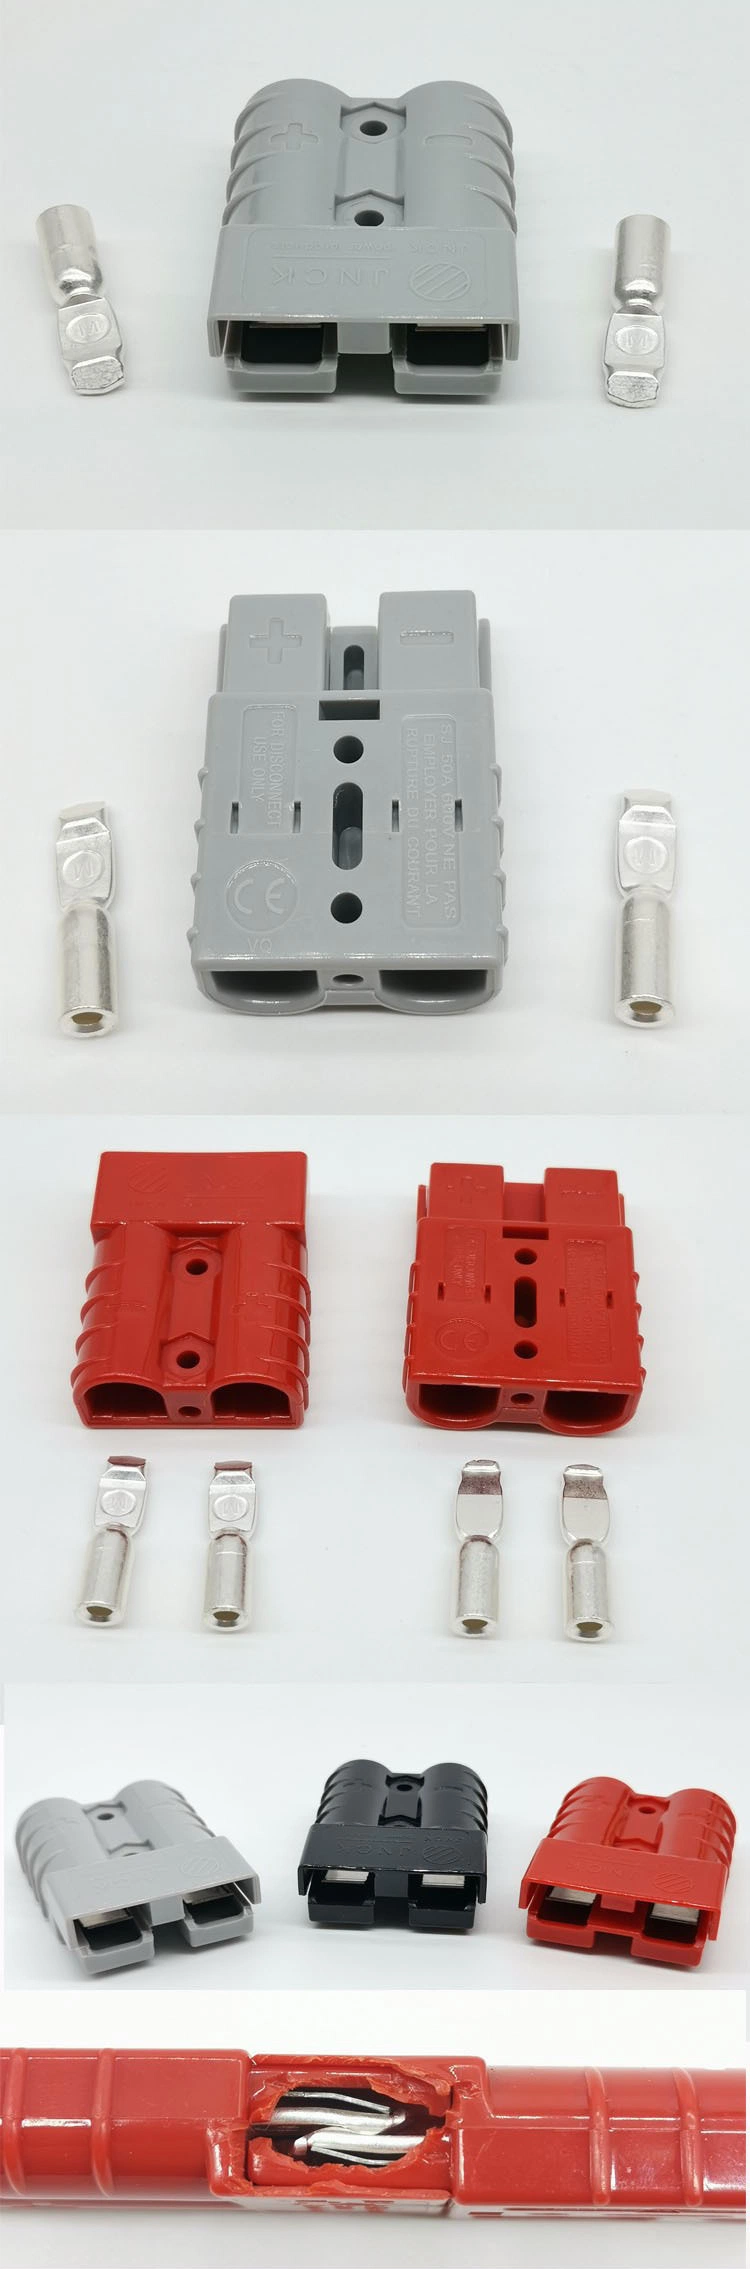 50A 120A 175A 350A 600V Ander-Son Forklift Battery Power Charging Plug Connector